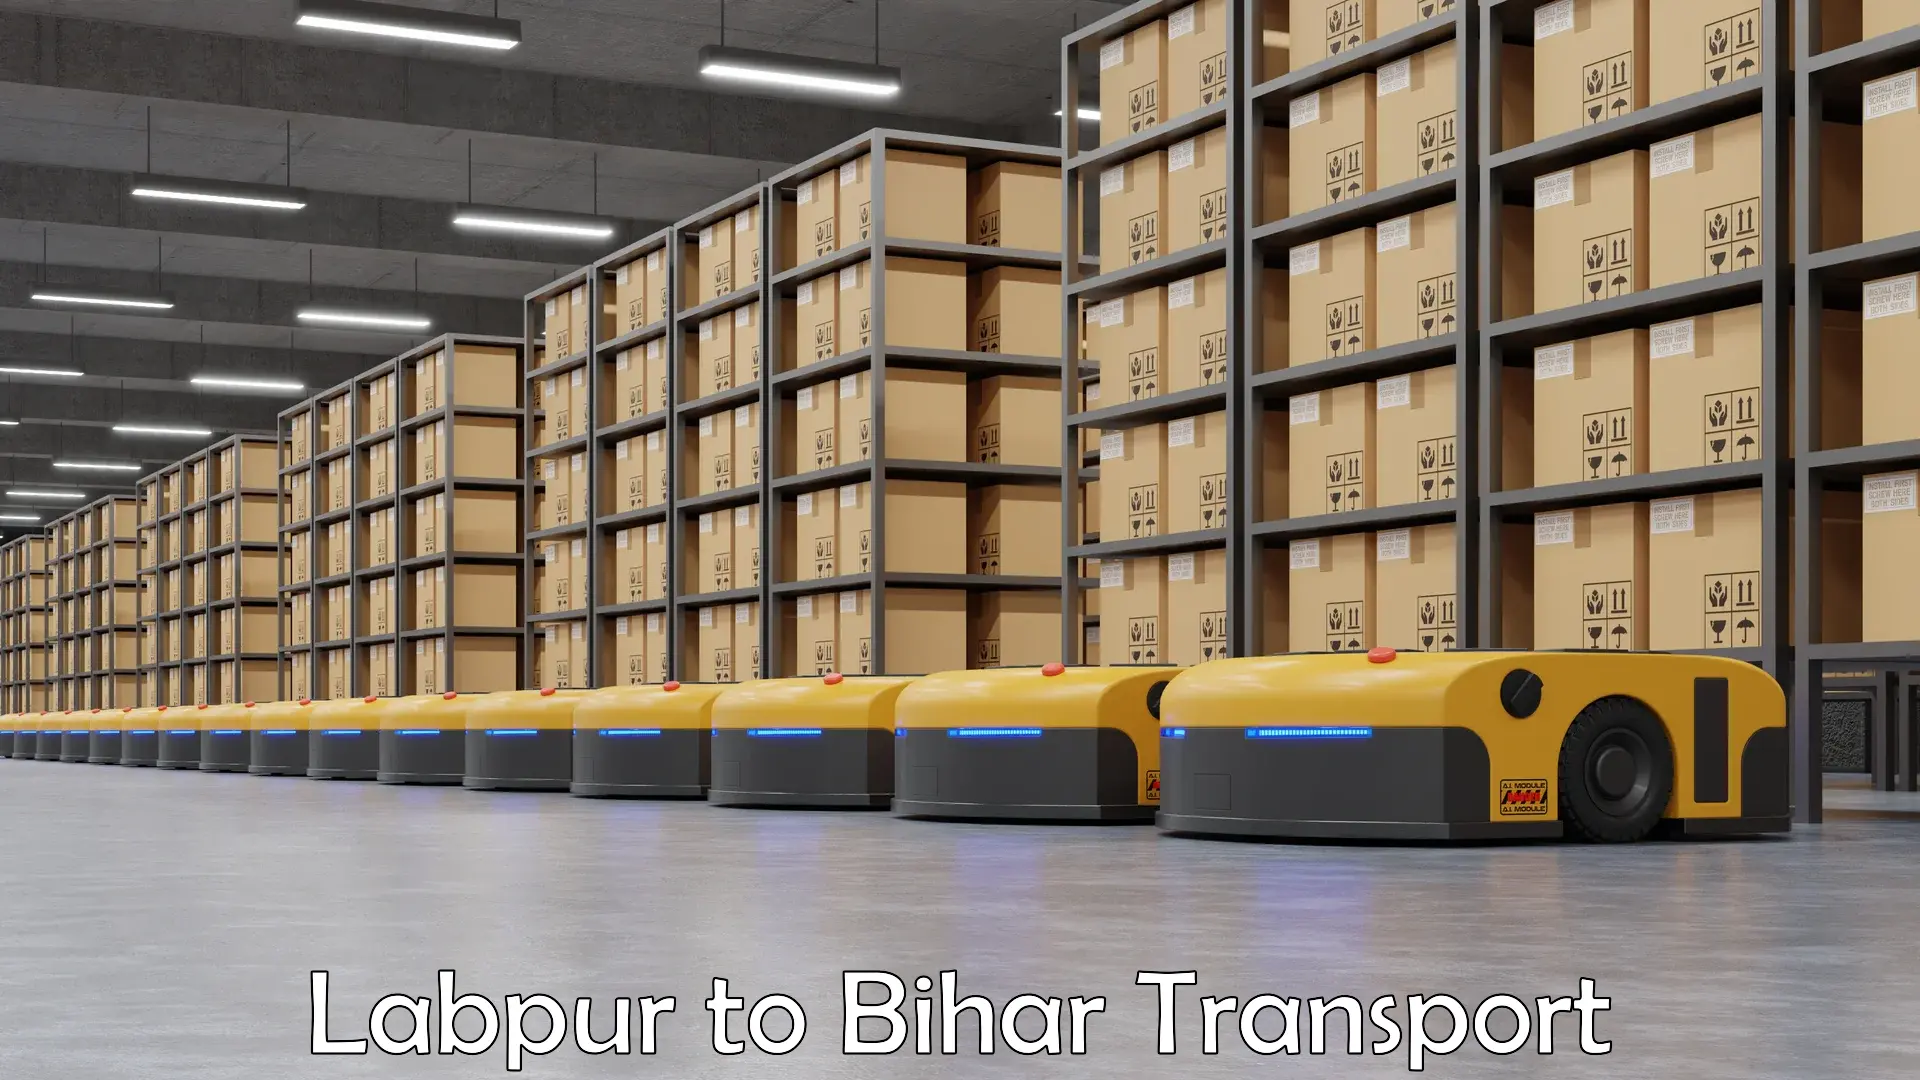 Truck transport companies in India Labpur to Rajpur